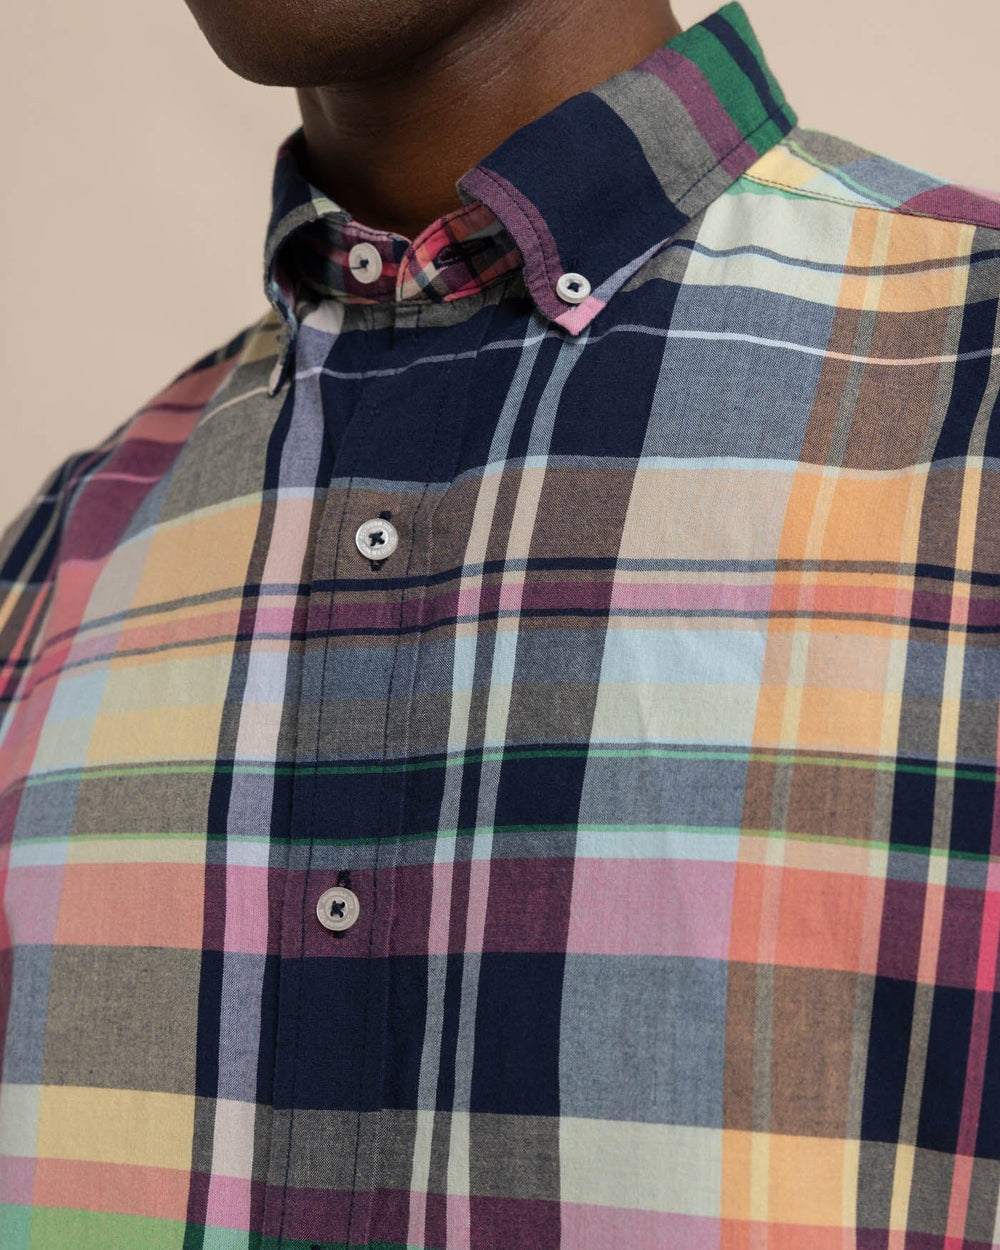 The detail view of the Southern Tide Harkers Island Madras Plaid Long Sleeve Sport Shirt by Southern Tide - Dress Blue